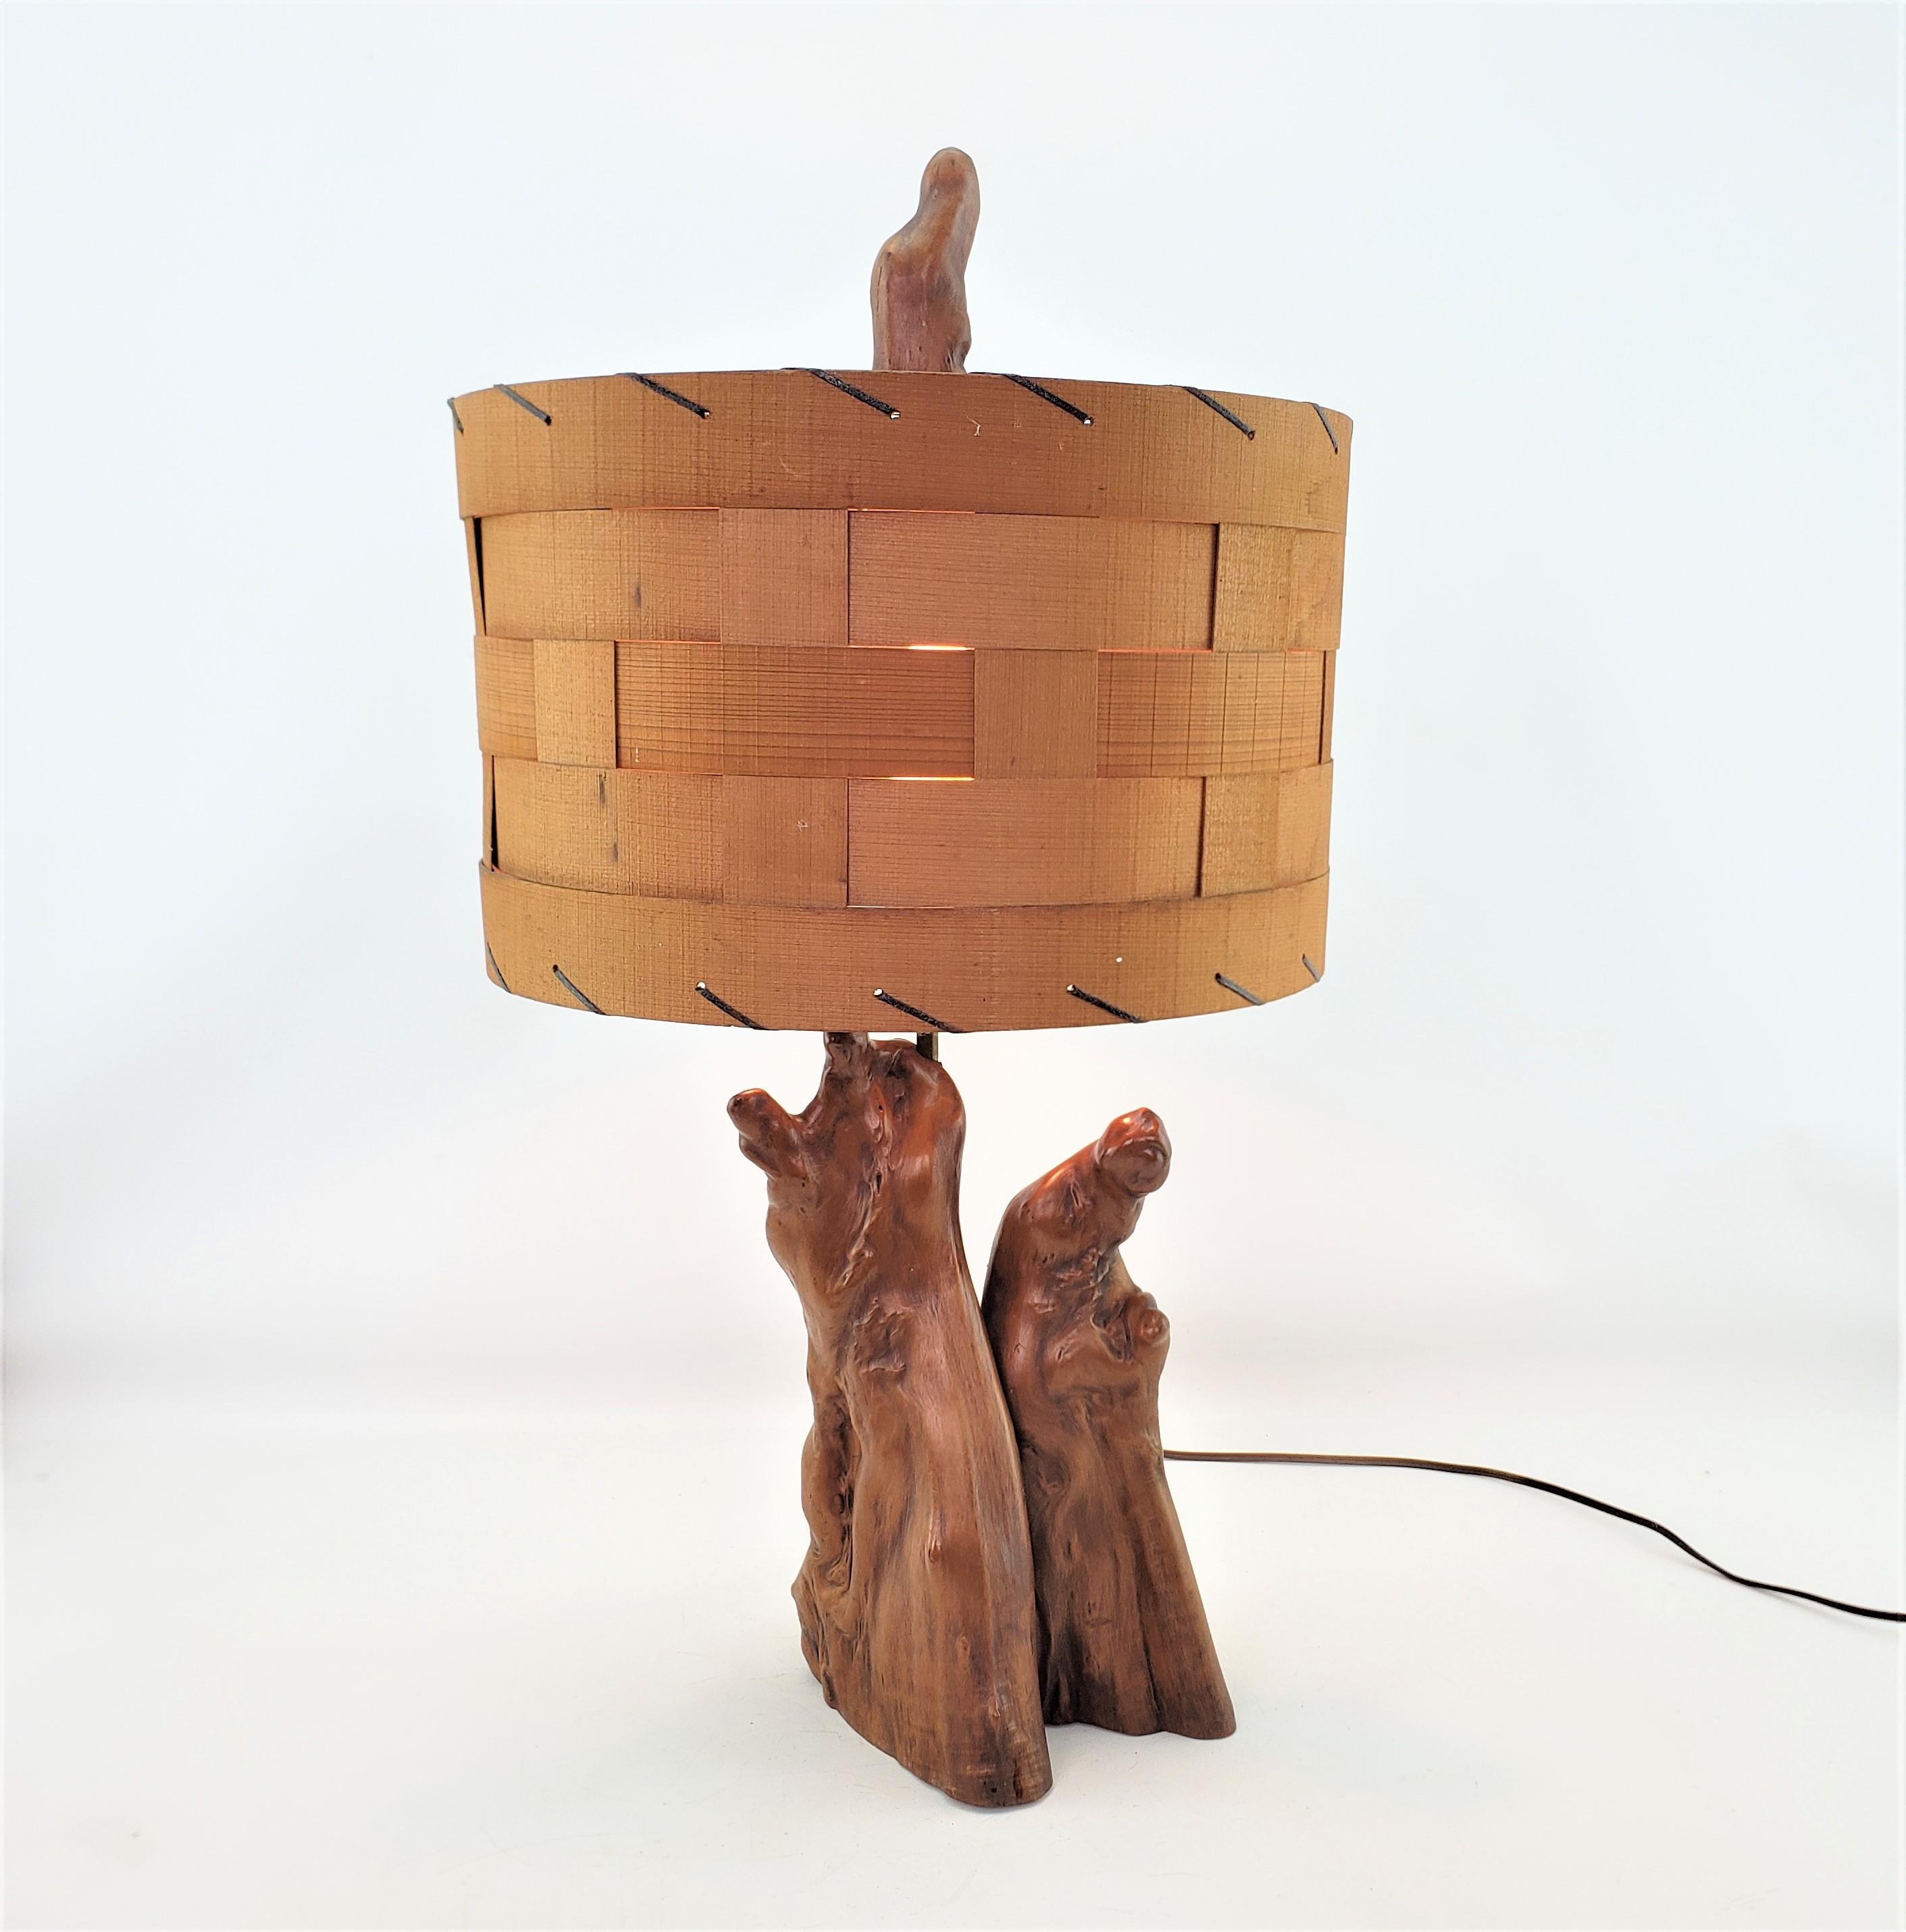 This vintage 'live edge' folk art table lamp was made by the Cypress Knee of New Ordleans, Louisiana of the United States in approximately 1960 in the period Mid-Century Modern style. The base of the lamp is composed of cypress wood knees which are